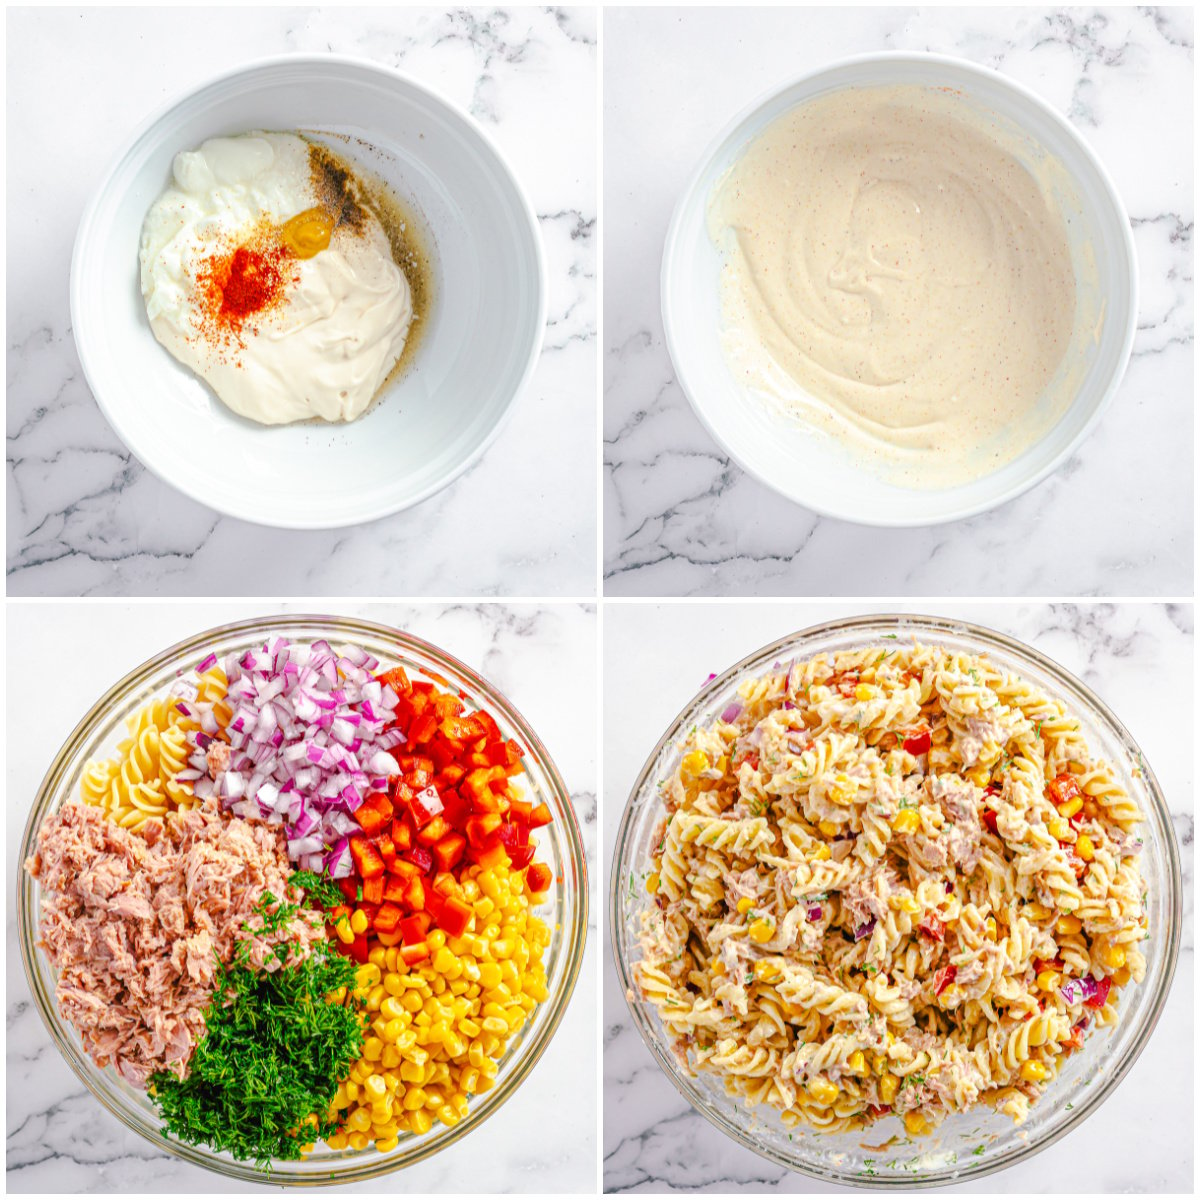 Step by step photos on how to make Tuna Pasta Salad.